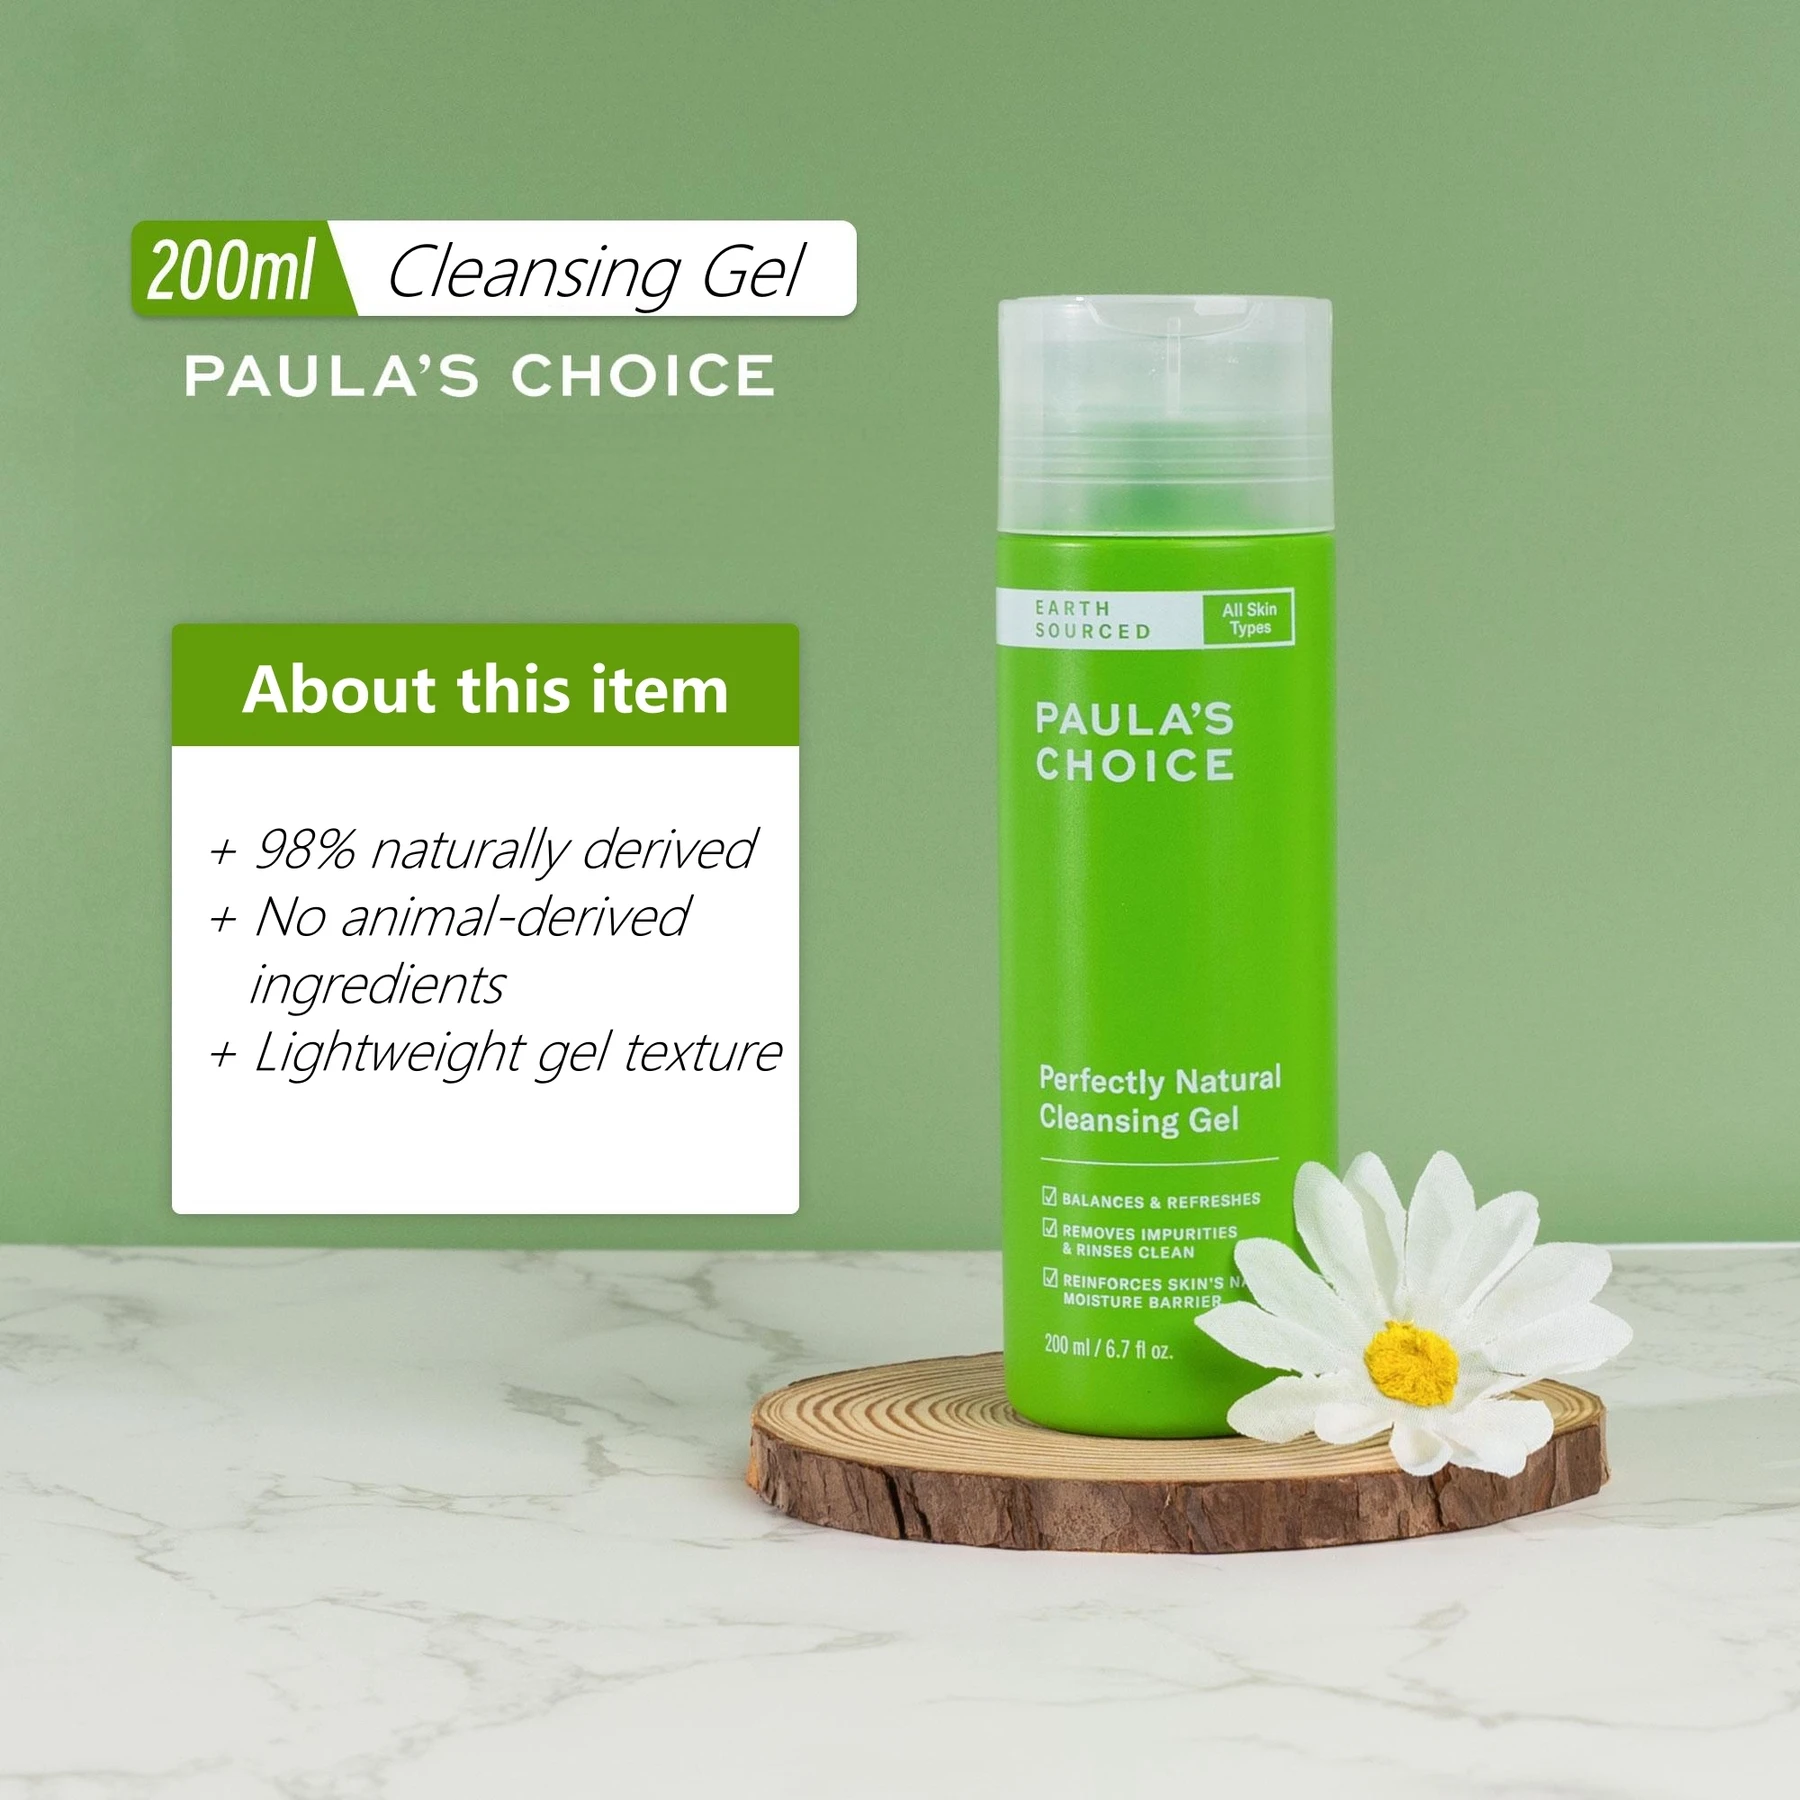 

Paula's Choice Perfectly Natural Gel Cleanser With Aloe Gentle Cleans Pores Oil Makeup Refreshed Skin Hydrating Face Wash 200ml